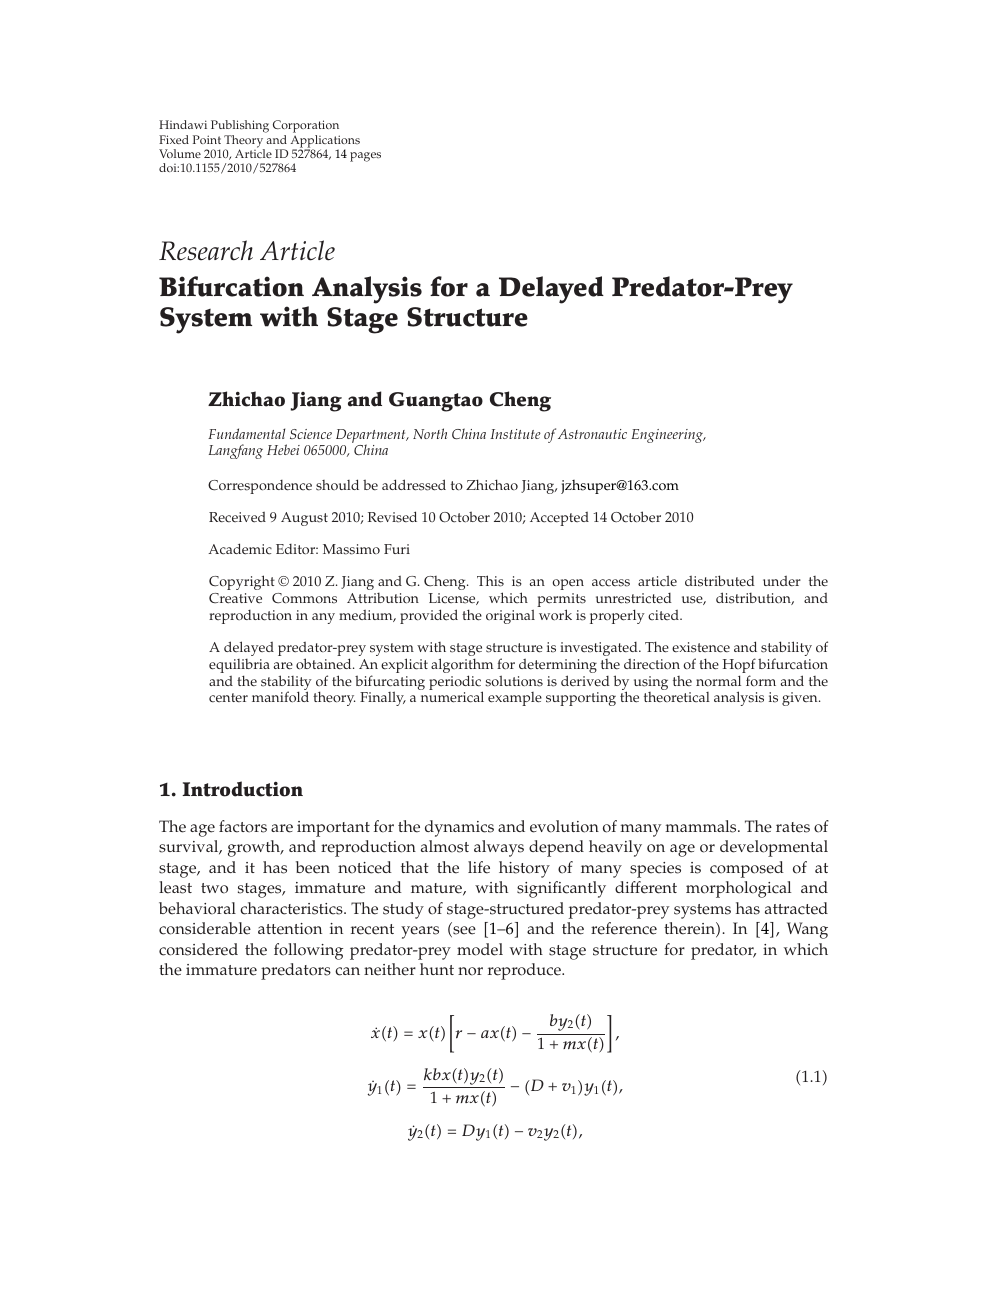 Bifurcation Analysis For A Delayed Predator Prey System With Stage Structure Topic Of Research Paper In Mathematics Download Scholarly Article Pdf And Read For Free On Cyberleninka Open Science Hub